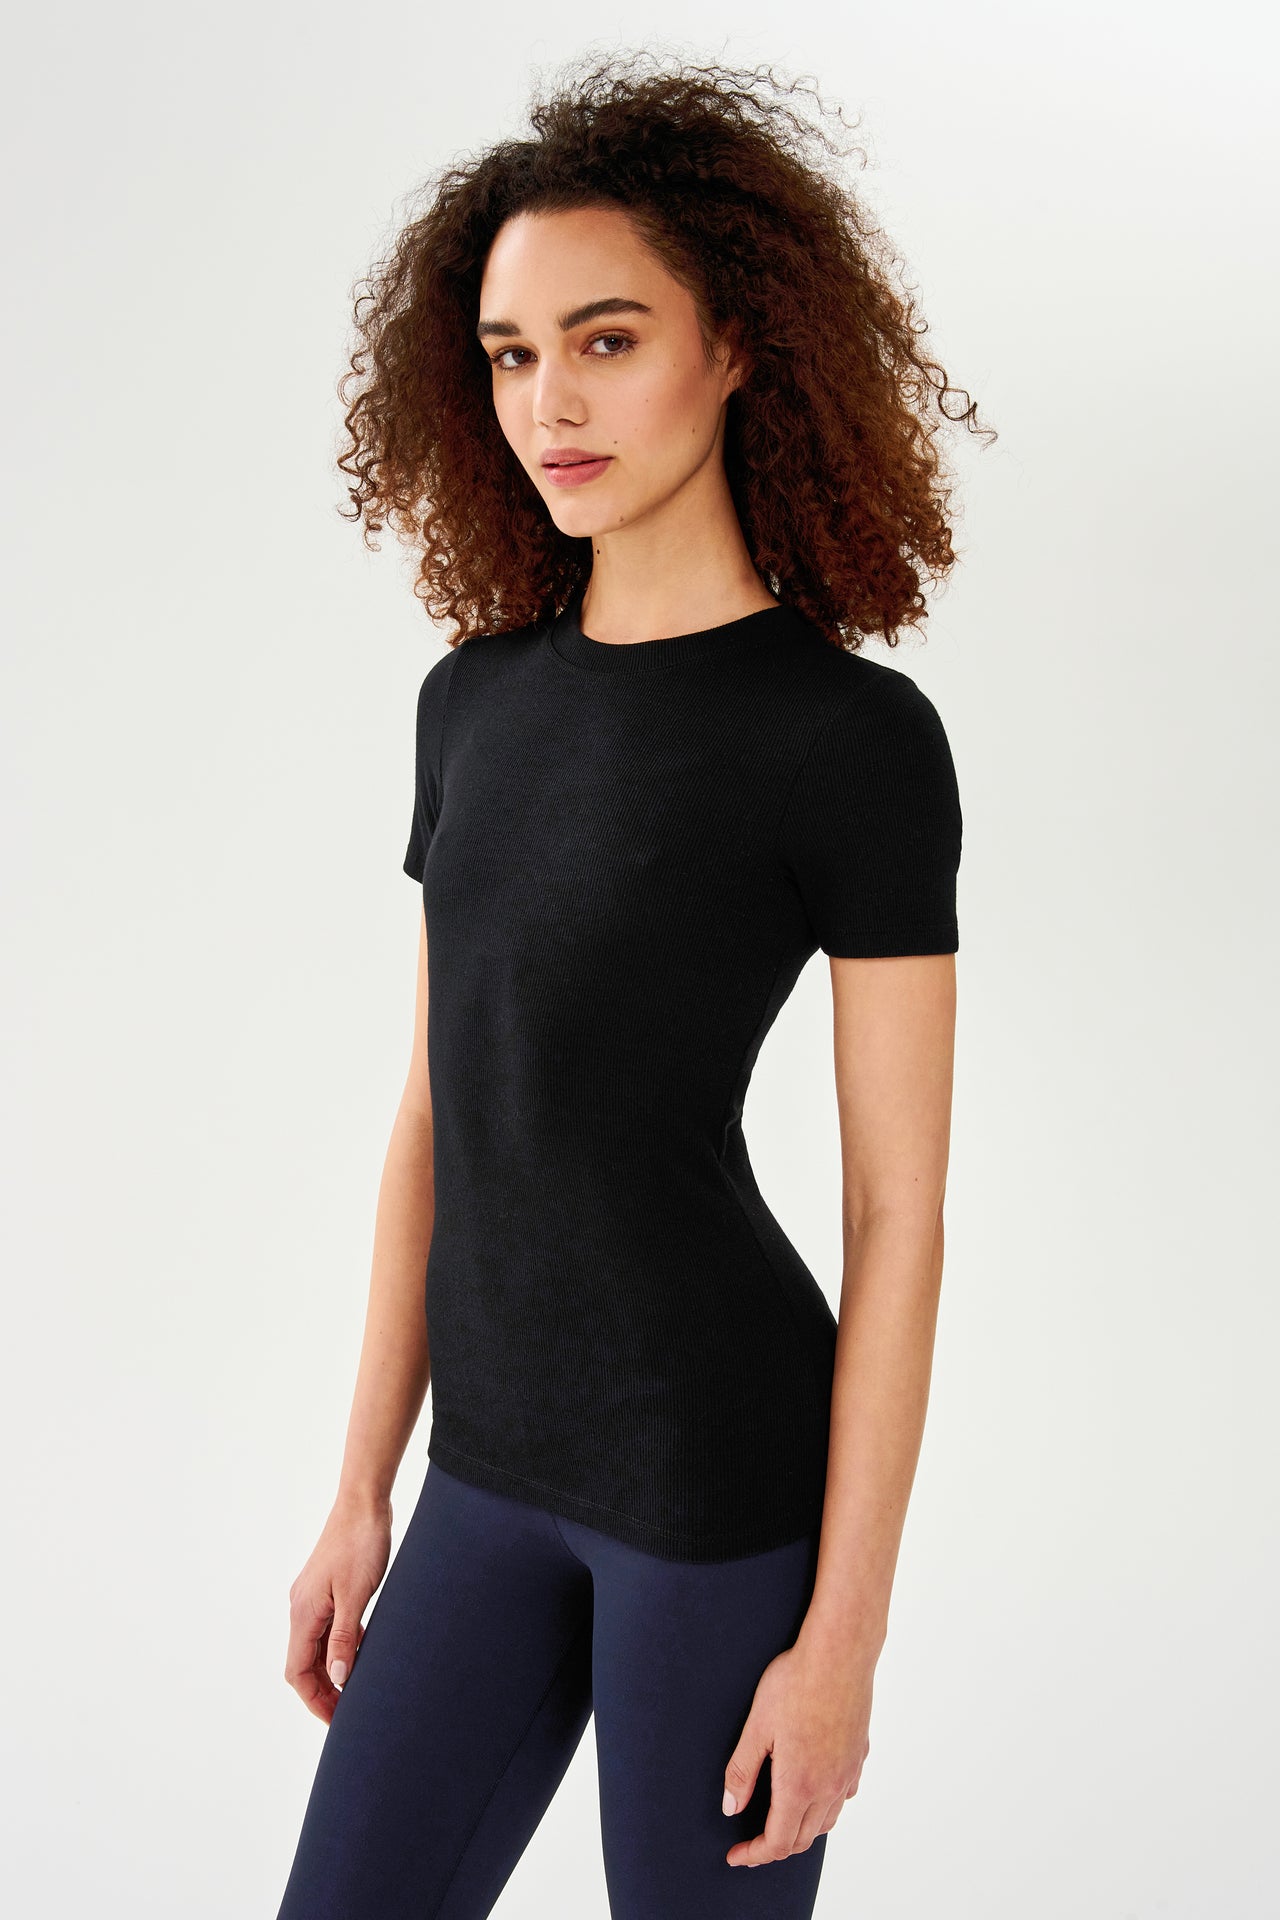 A woman wearing a SPLITS59 Louise Rib Short Sleeve - Black t-shirt and blue leggings, ready for her yoga session.